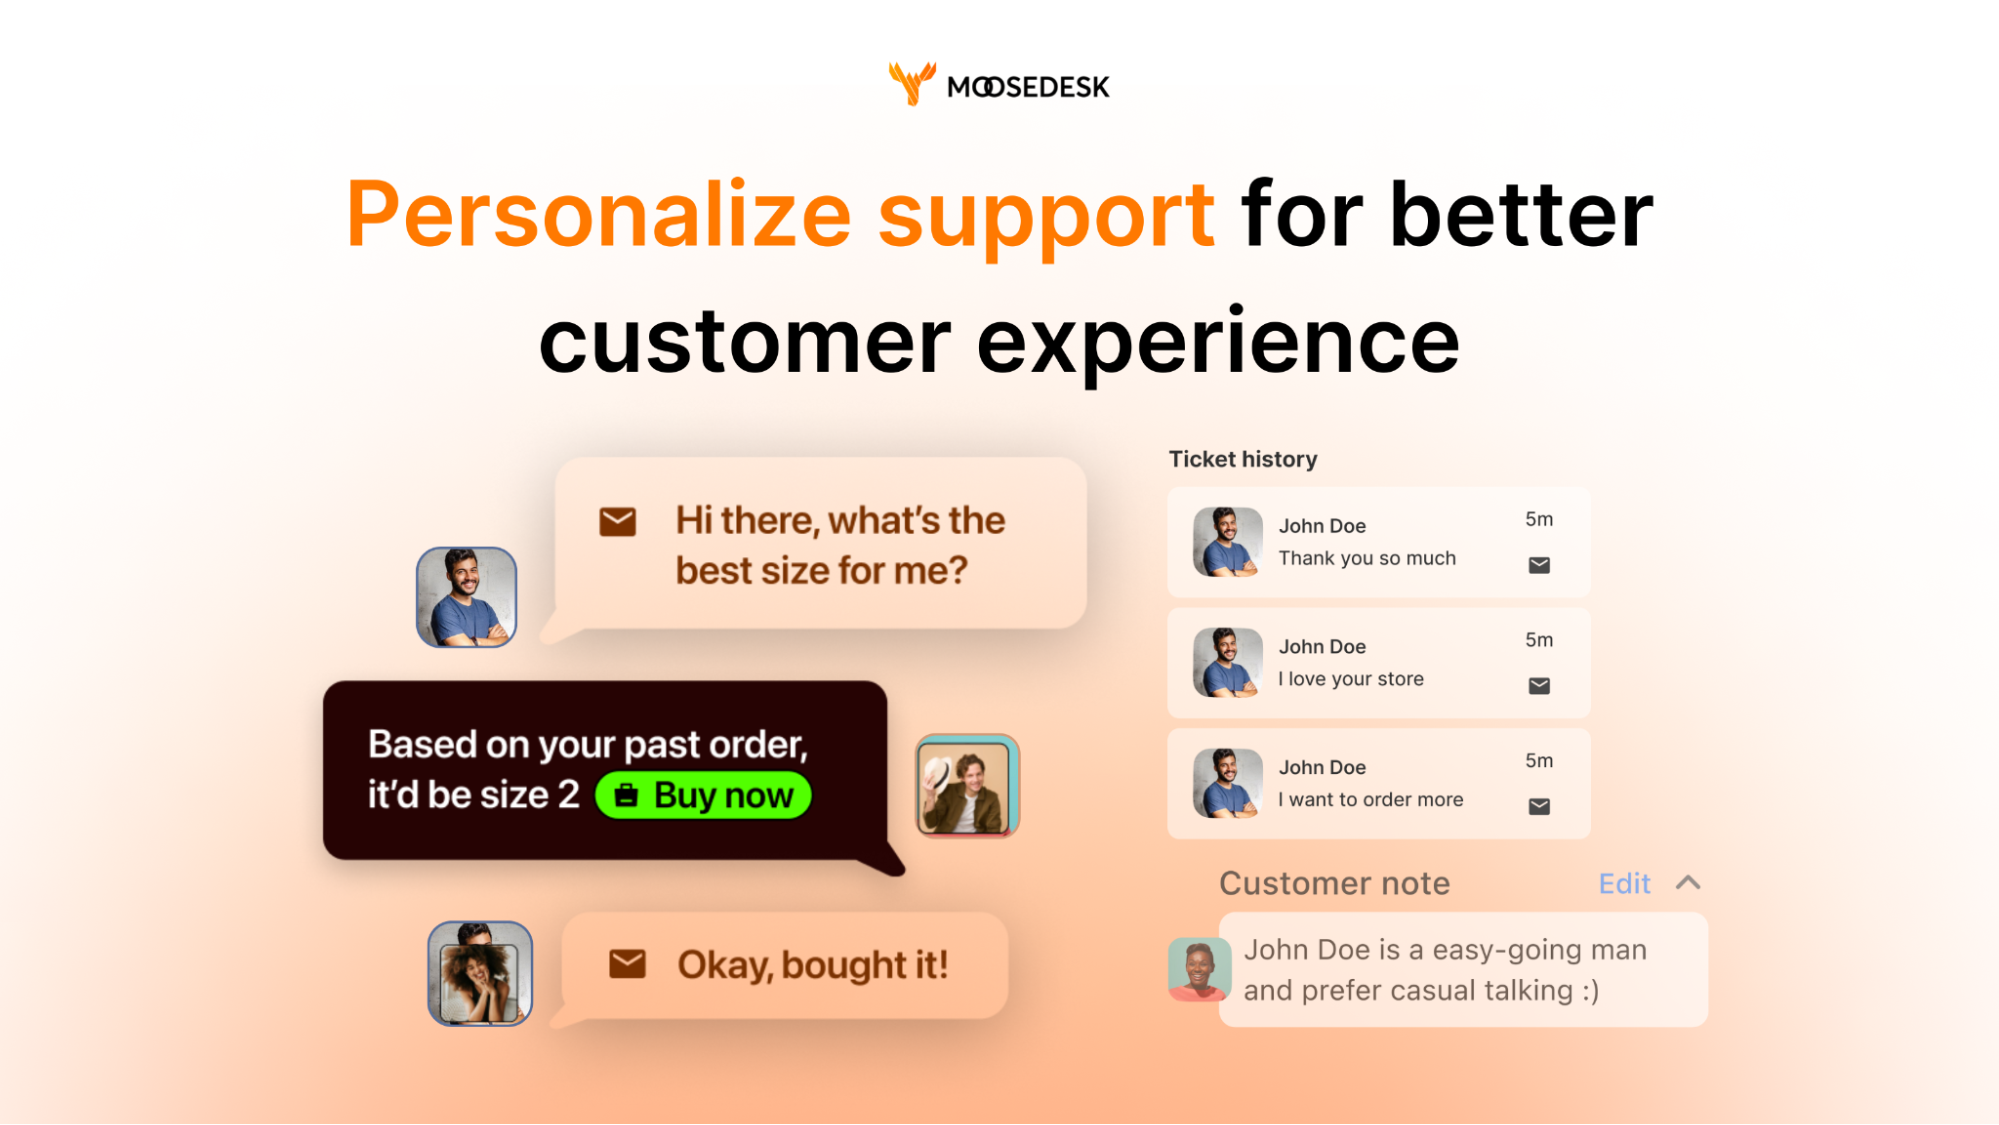 MooseDesk personalized customer support